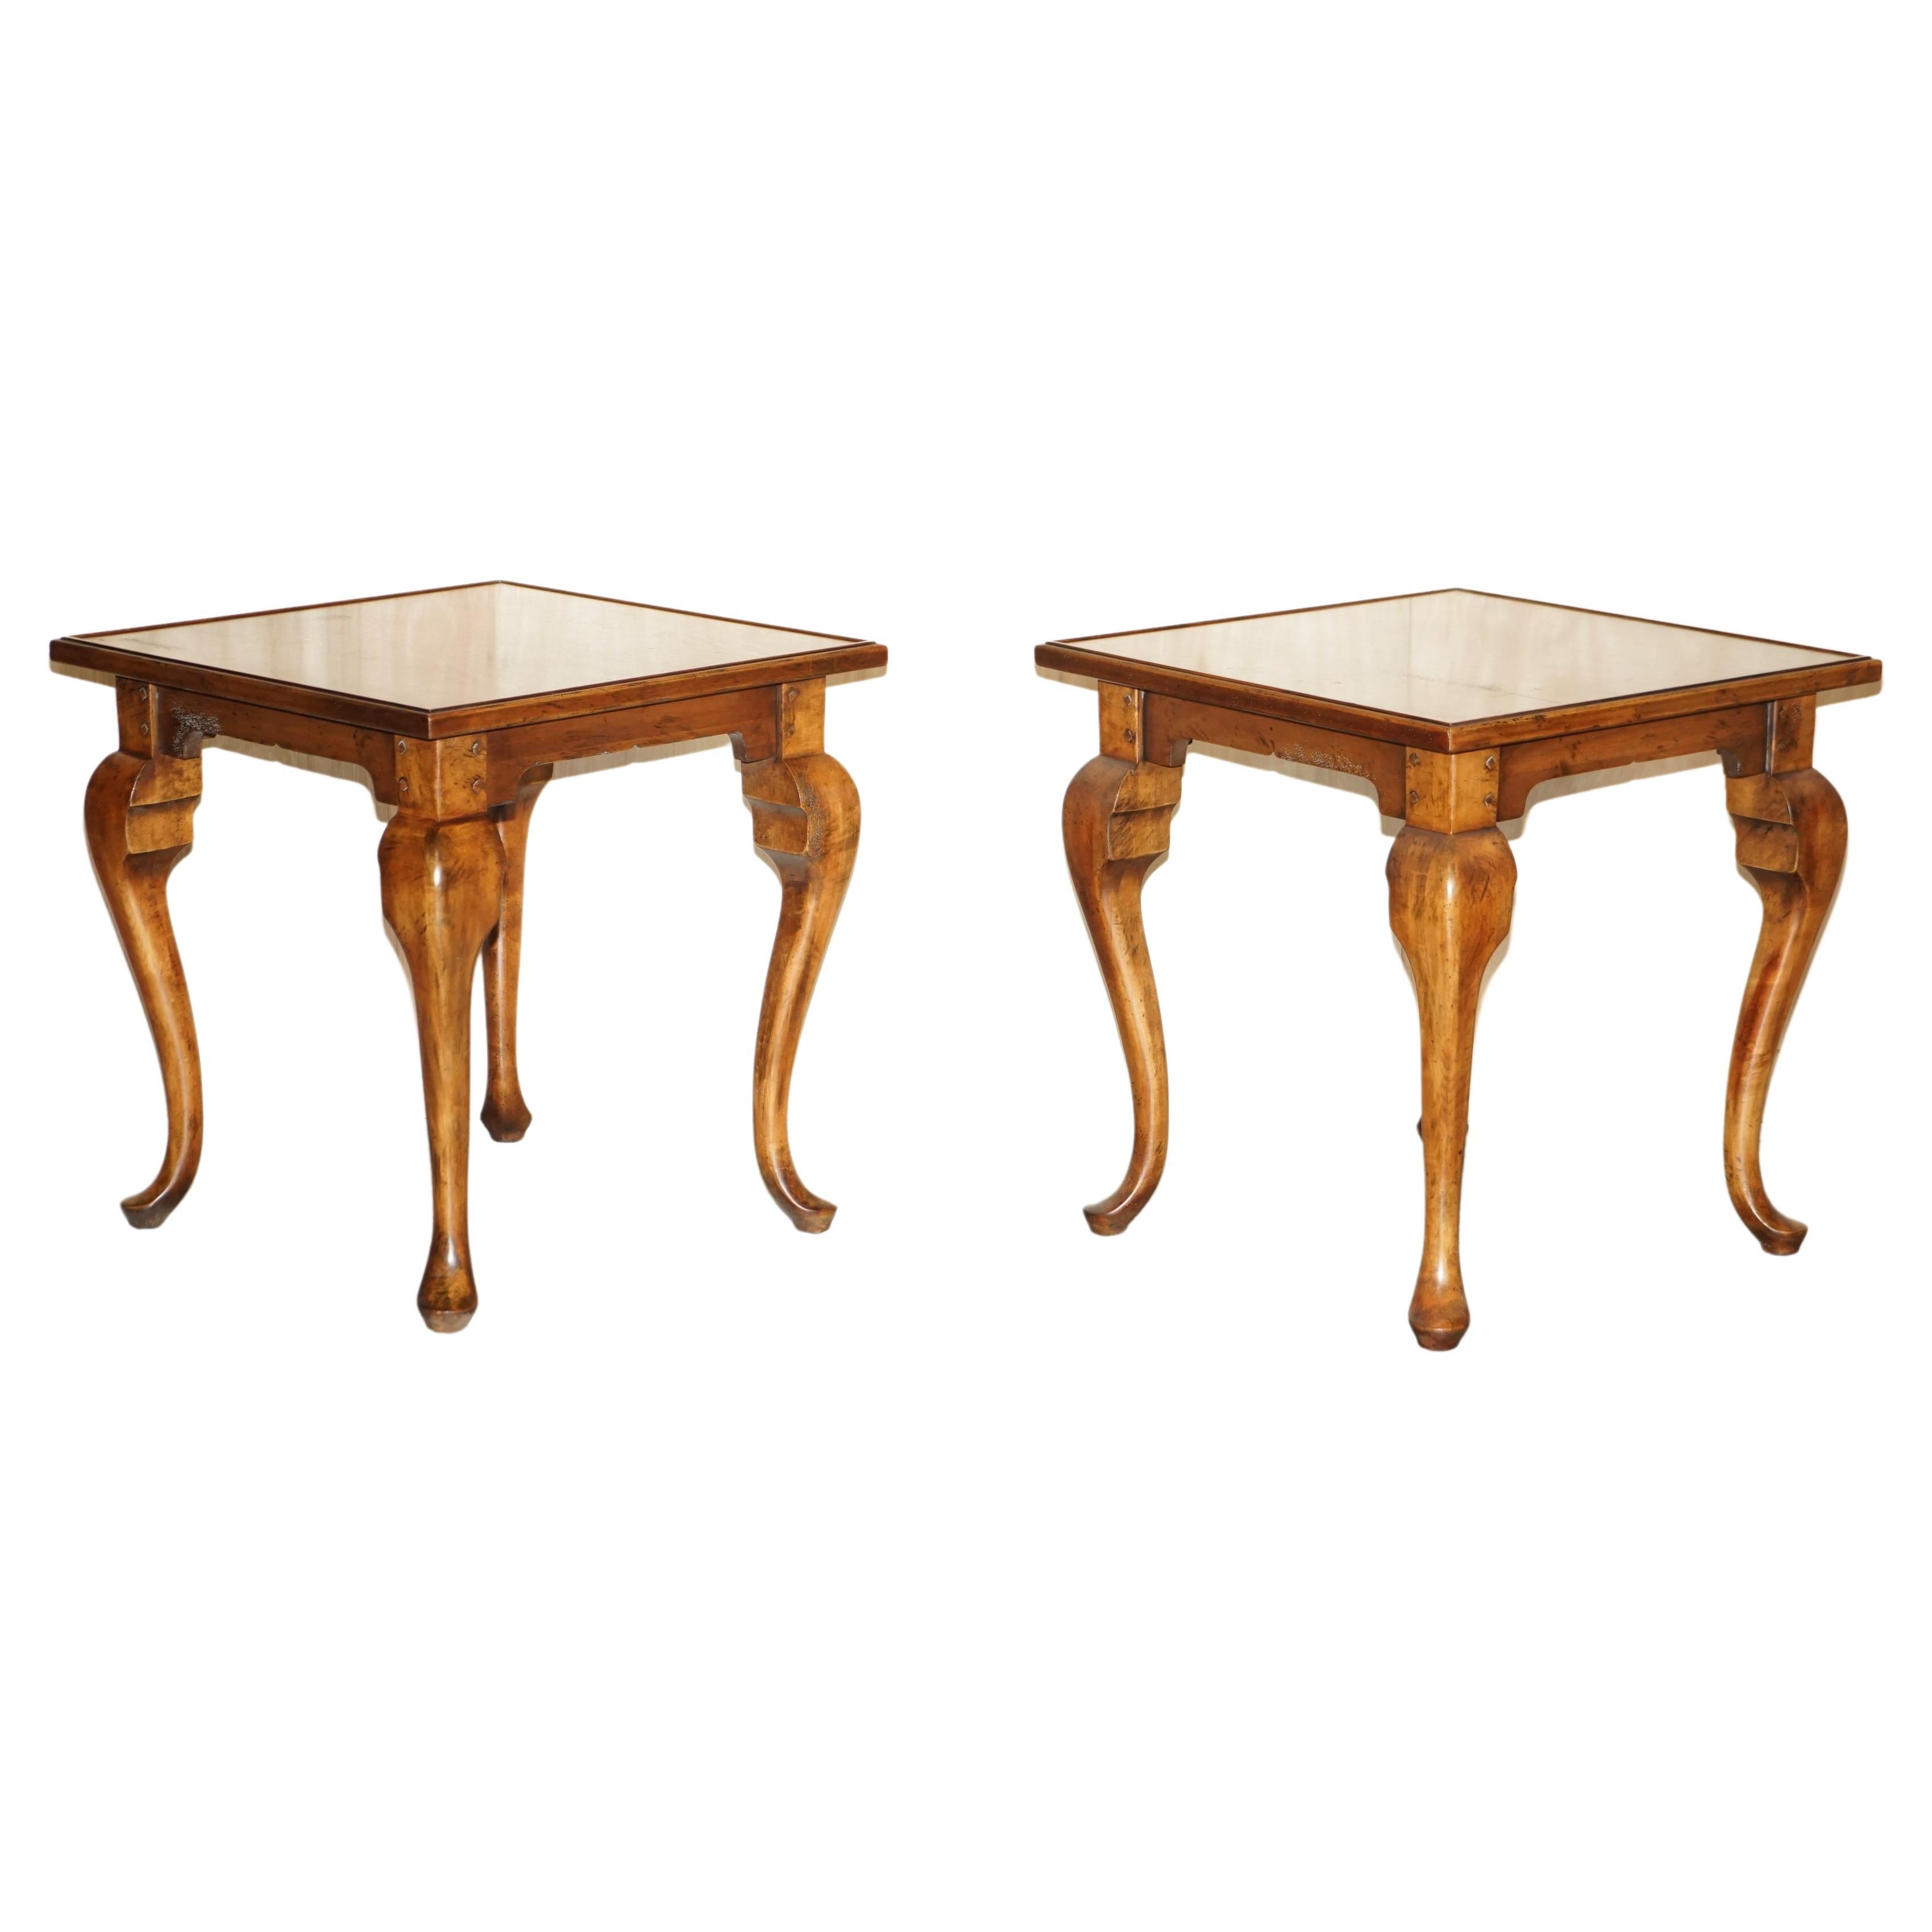 PAIR OF RALPH LAUREN AMERICAN WALNUT LARGE SiDE END OCCASIONAL LAMP WINE TABLES For Sale